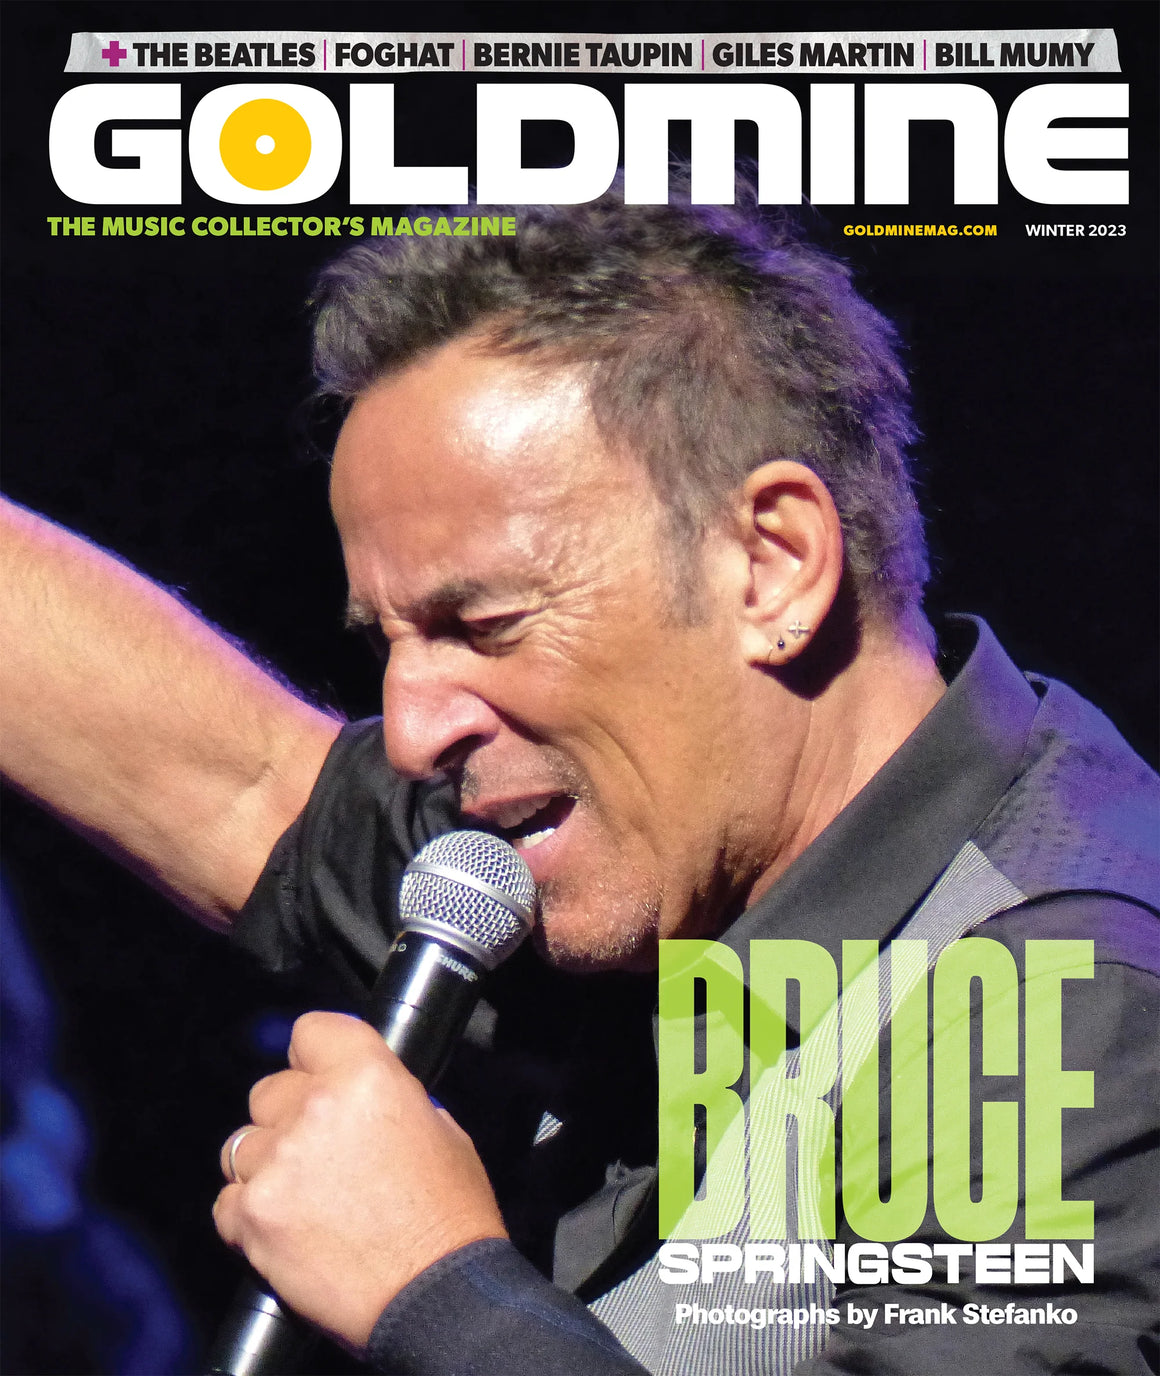 GOLDMINE MAGAZINE: WINTER 2023 ISSUE FEATURING BRUCE SPRINGSTEEN